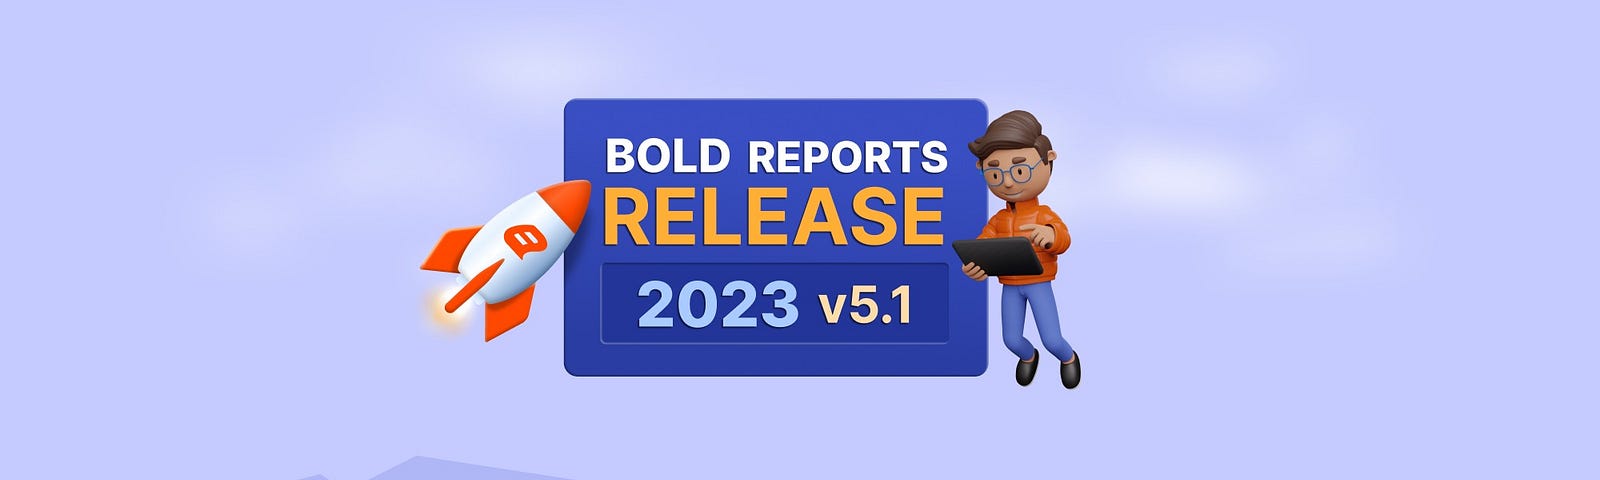 What’s New in Bold Reports 5.1